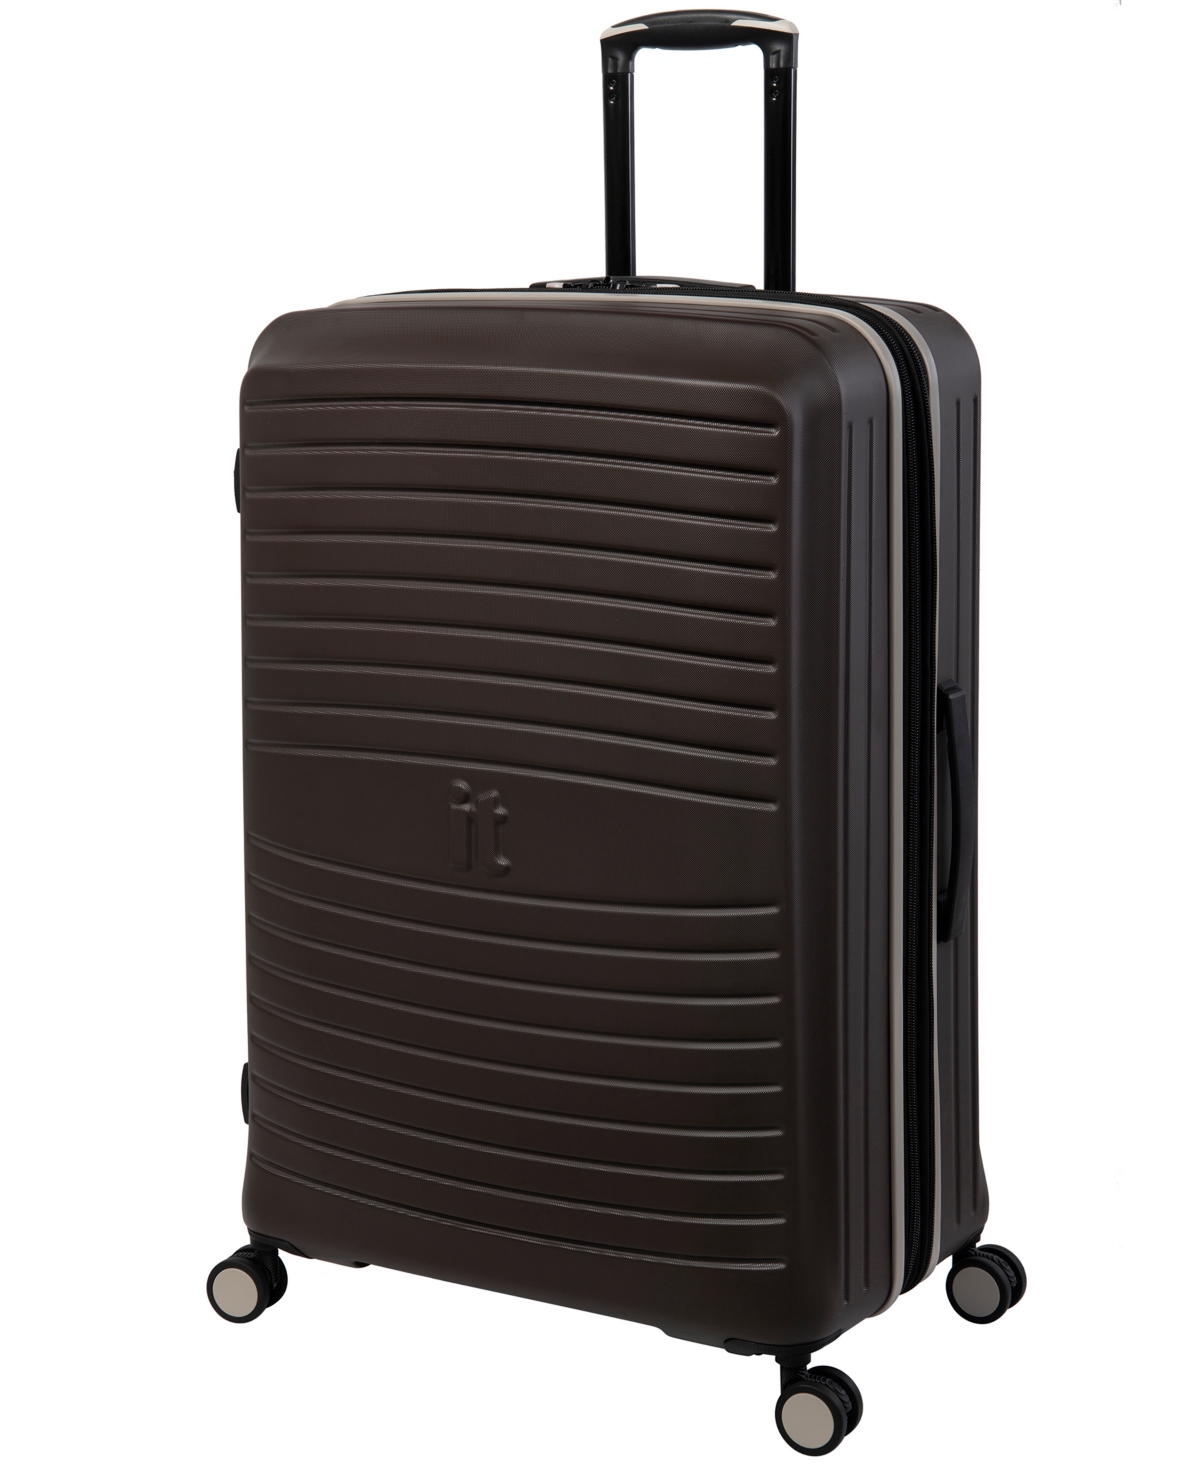 25" Hardside 8-Wheel Expandable Spinner Luggage - Coffee Bean